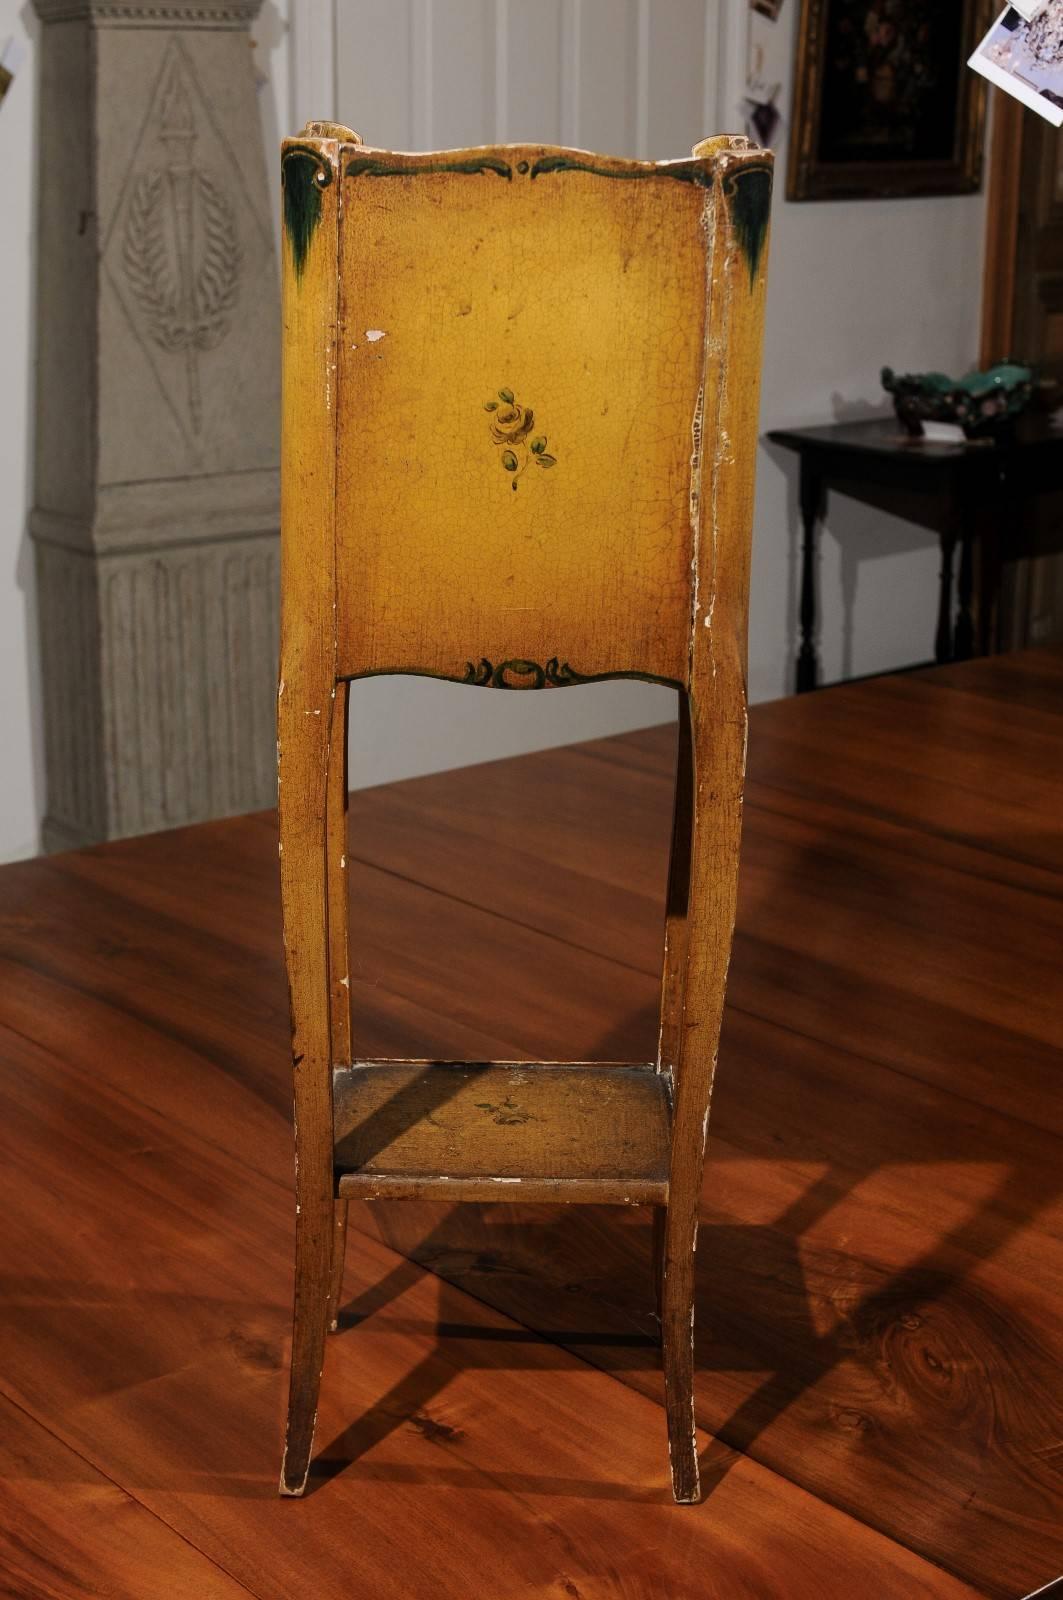 Italian 19th Century Nightstand Table with Painted Decor, Drawers and Low Shelf 4